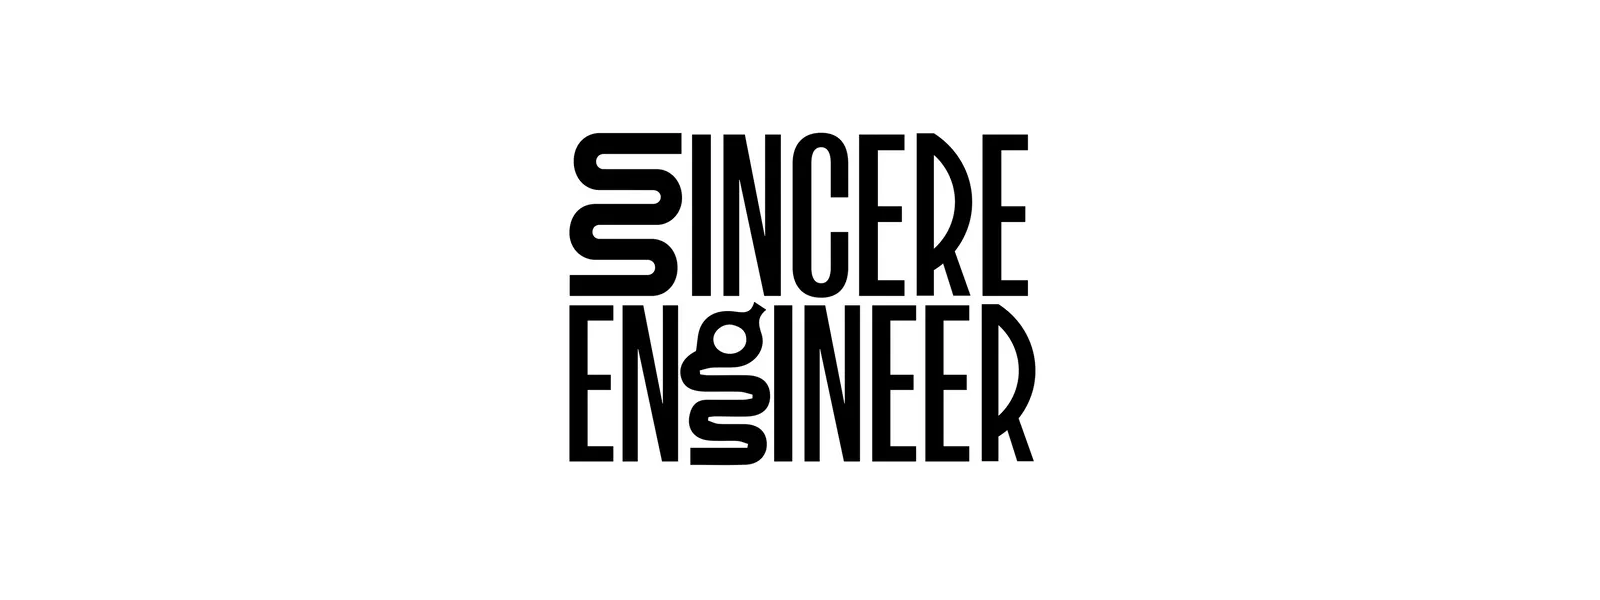 Sincere Engineer Talks on New Album, Lollapalooza and More